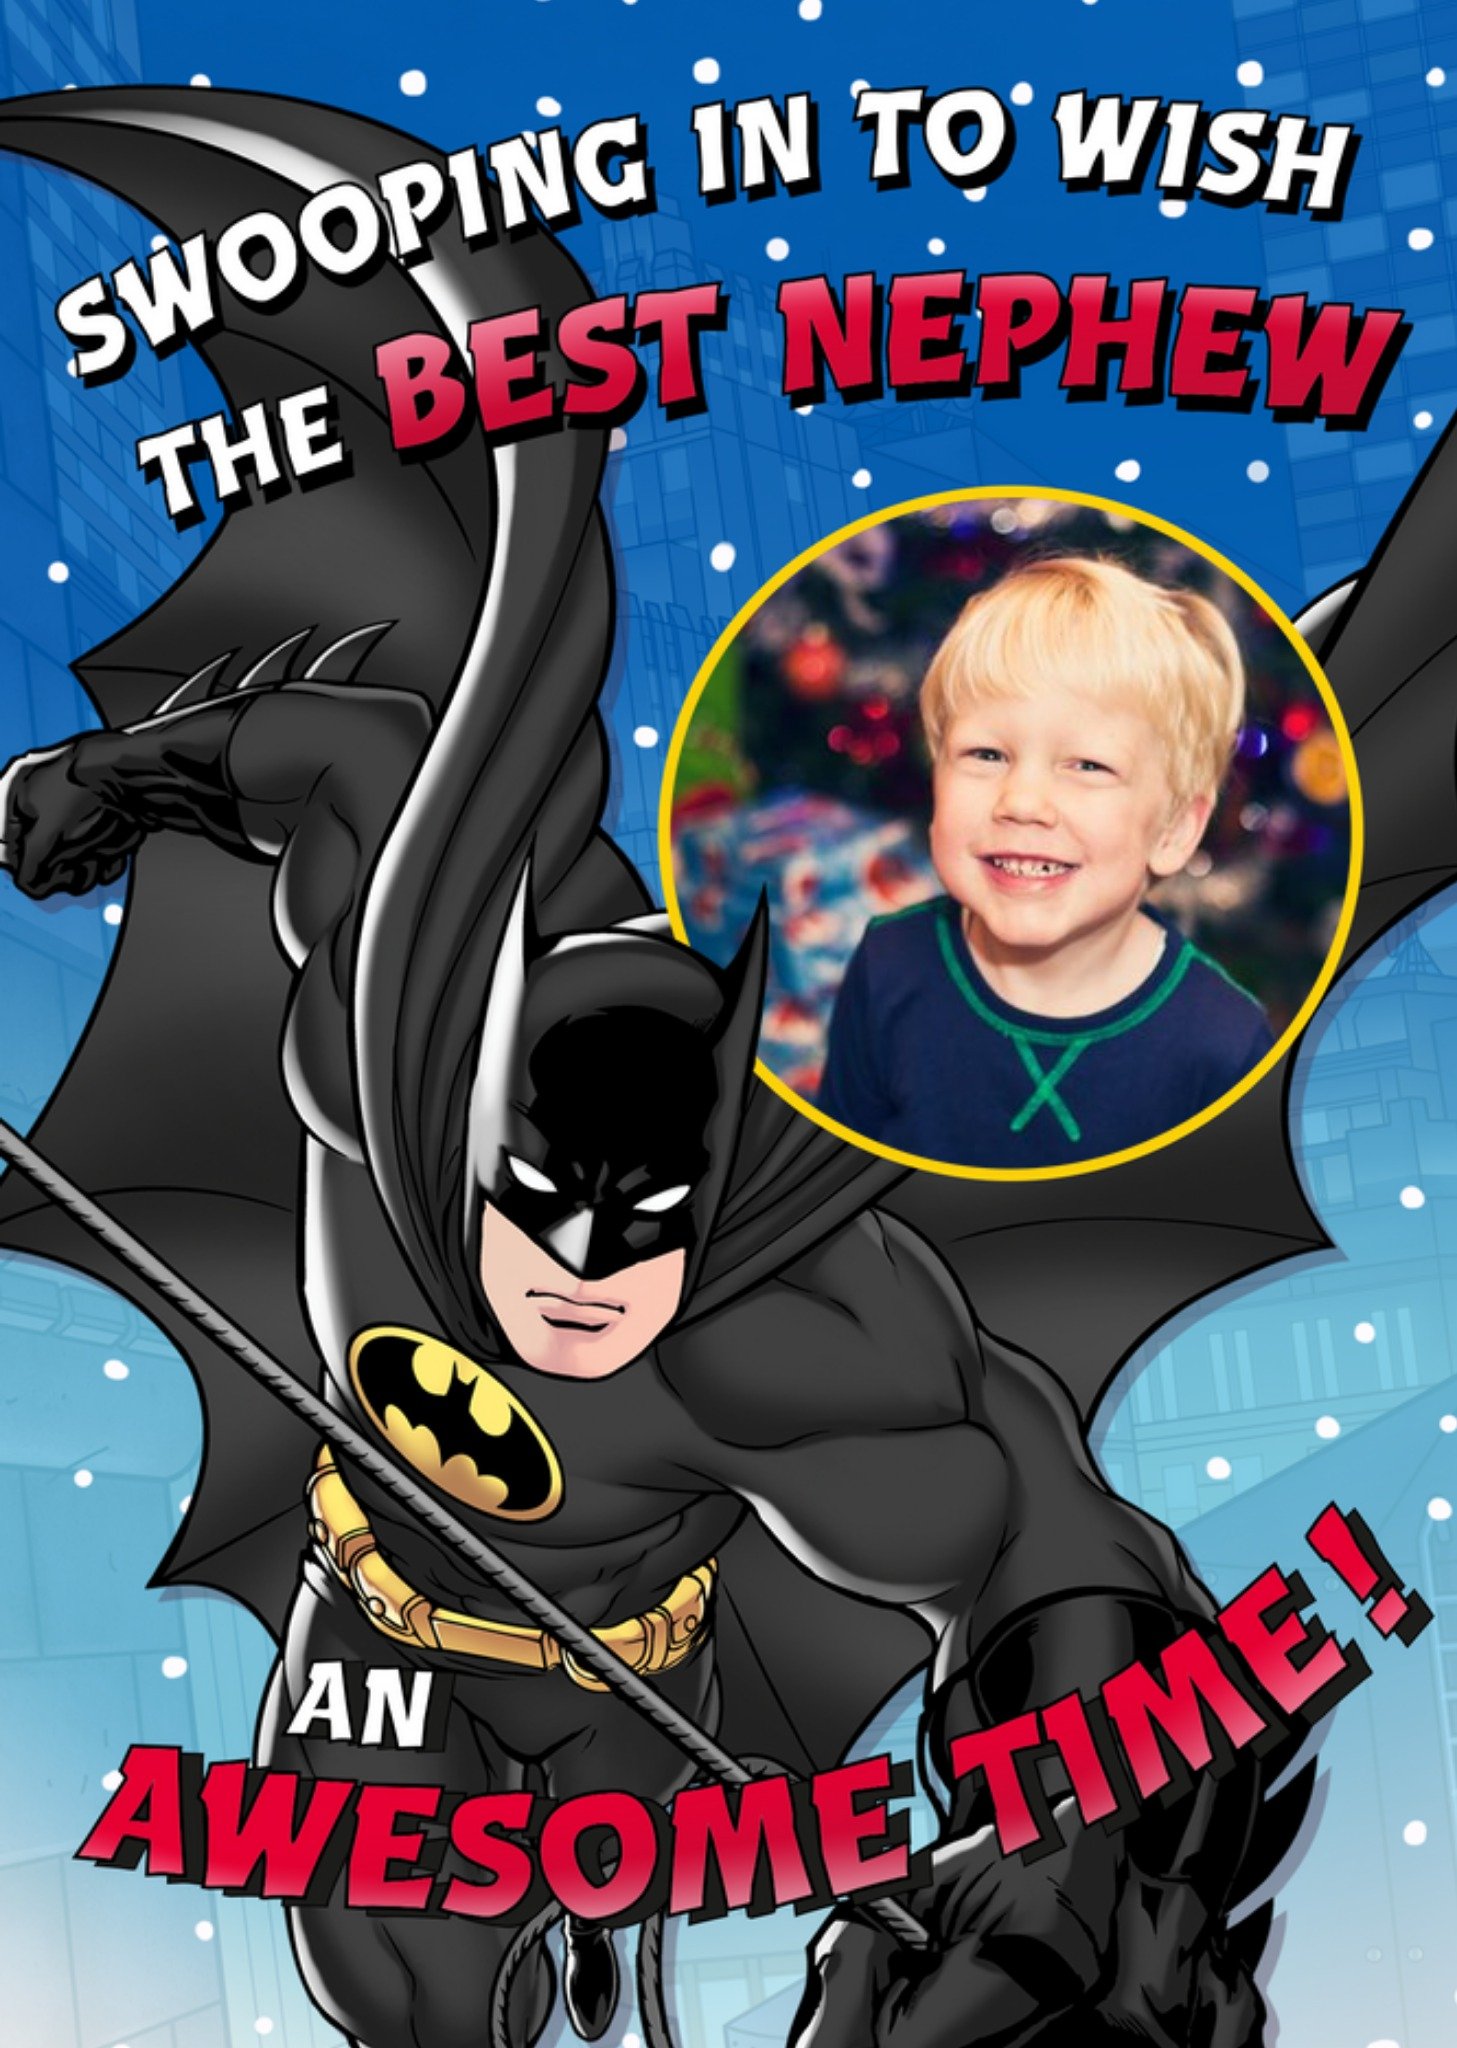 Other Batman Swooping In To Wish The Best Nephew An Awesome Time, Large Card